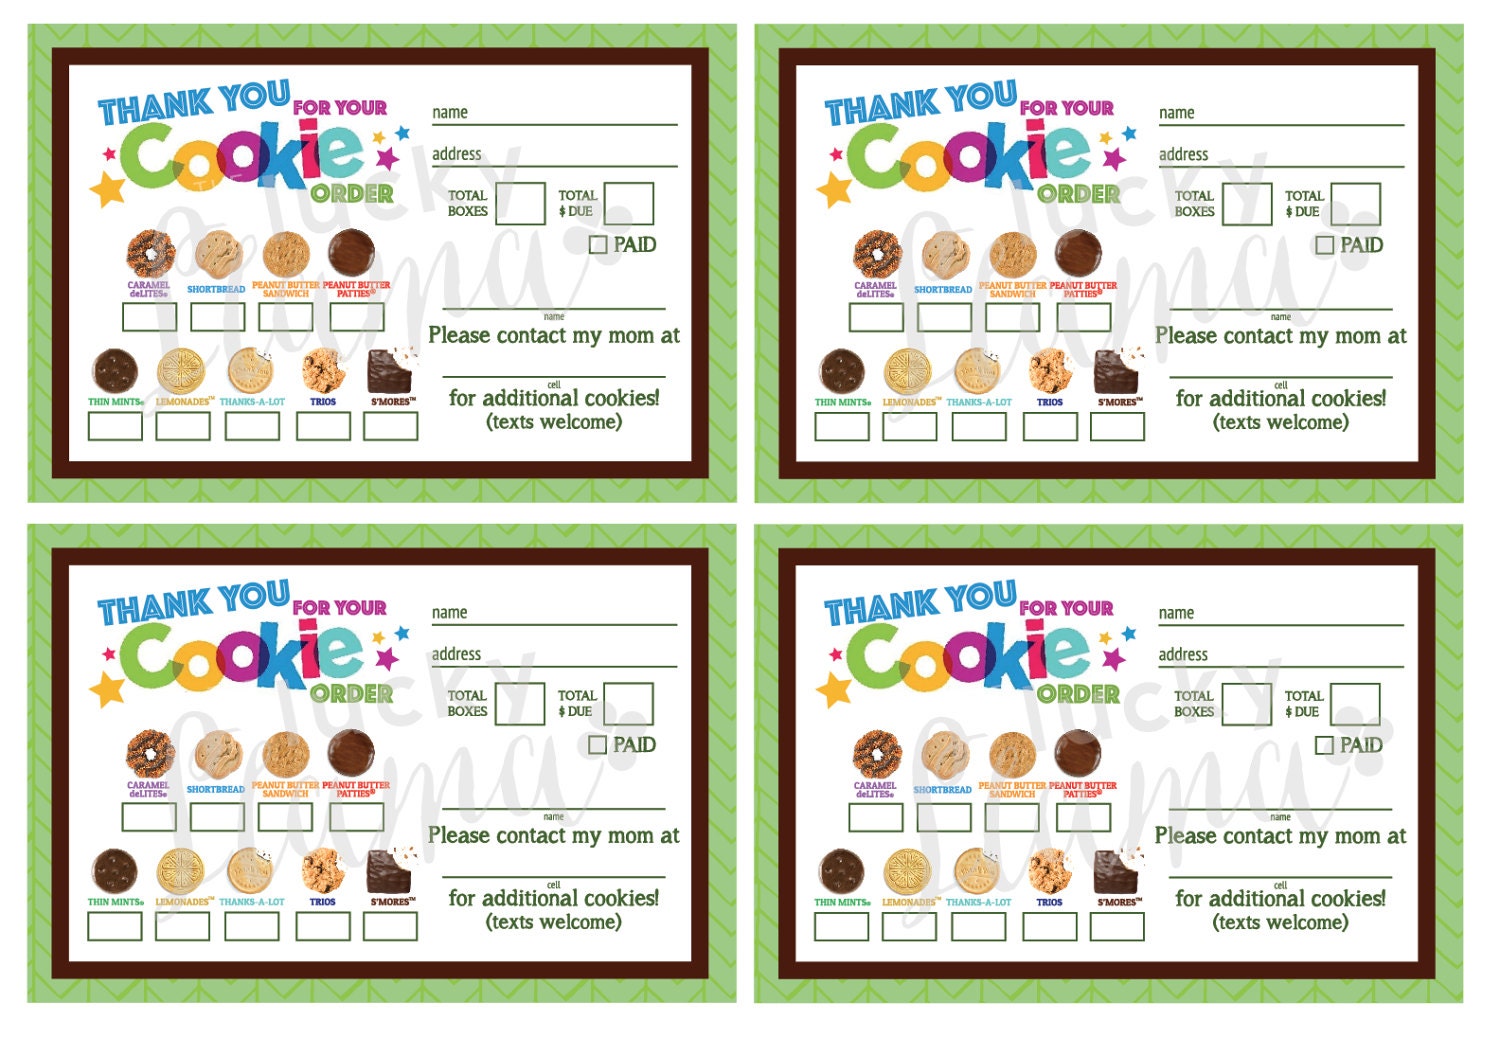 2018-girl-scout-cookie-thank-you-order-form-receipt